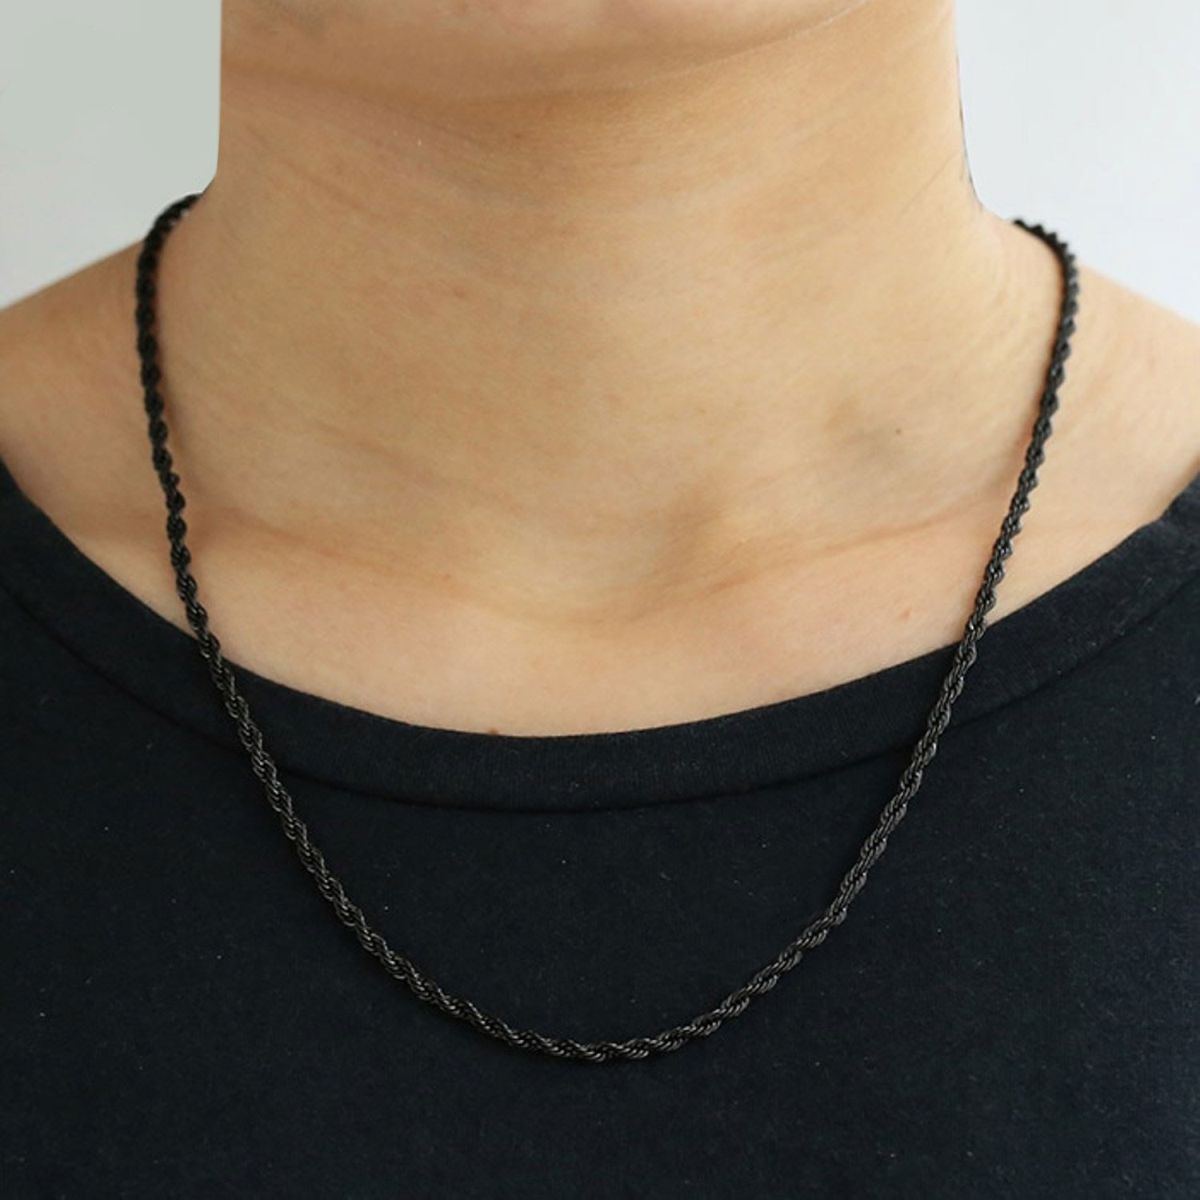 Black Rope 316L Surgical Stainless Steel 24 Necklace Chain For